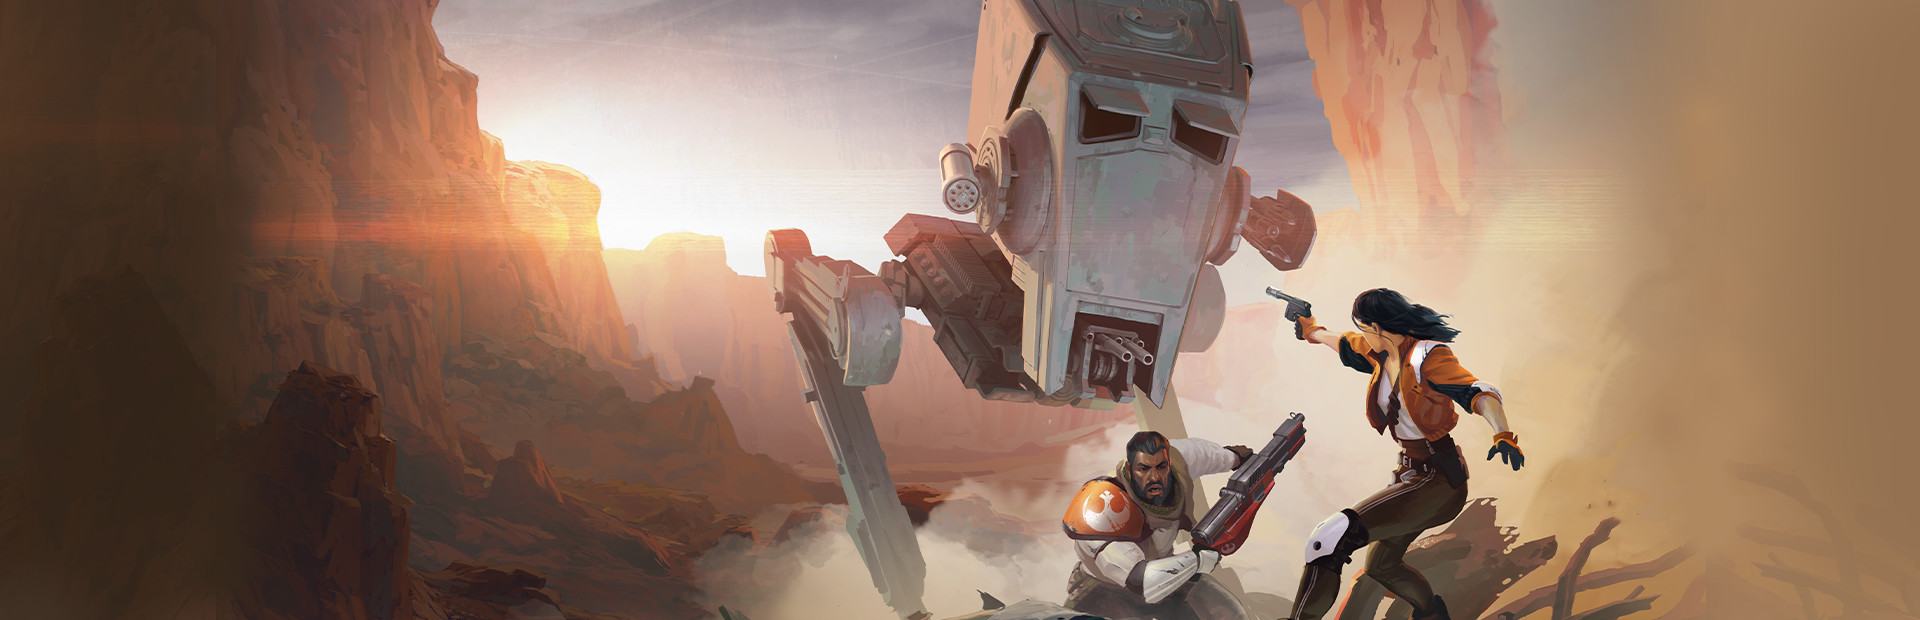 Star Wars: Imperial Assault - Legends of the Alliance cover image